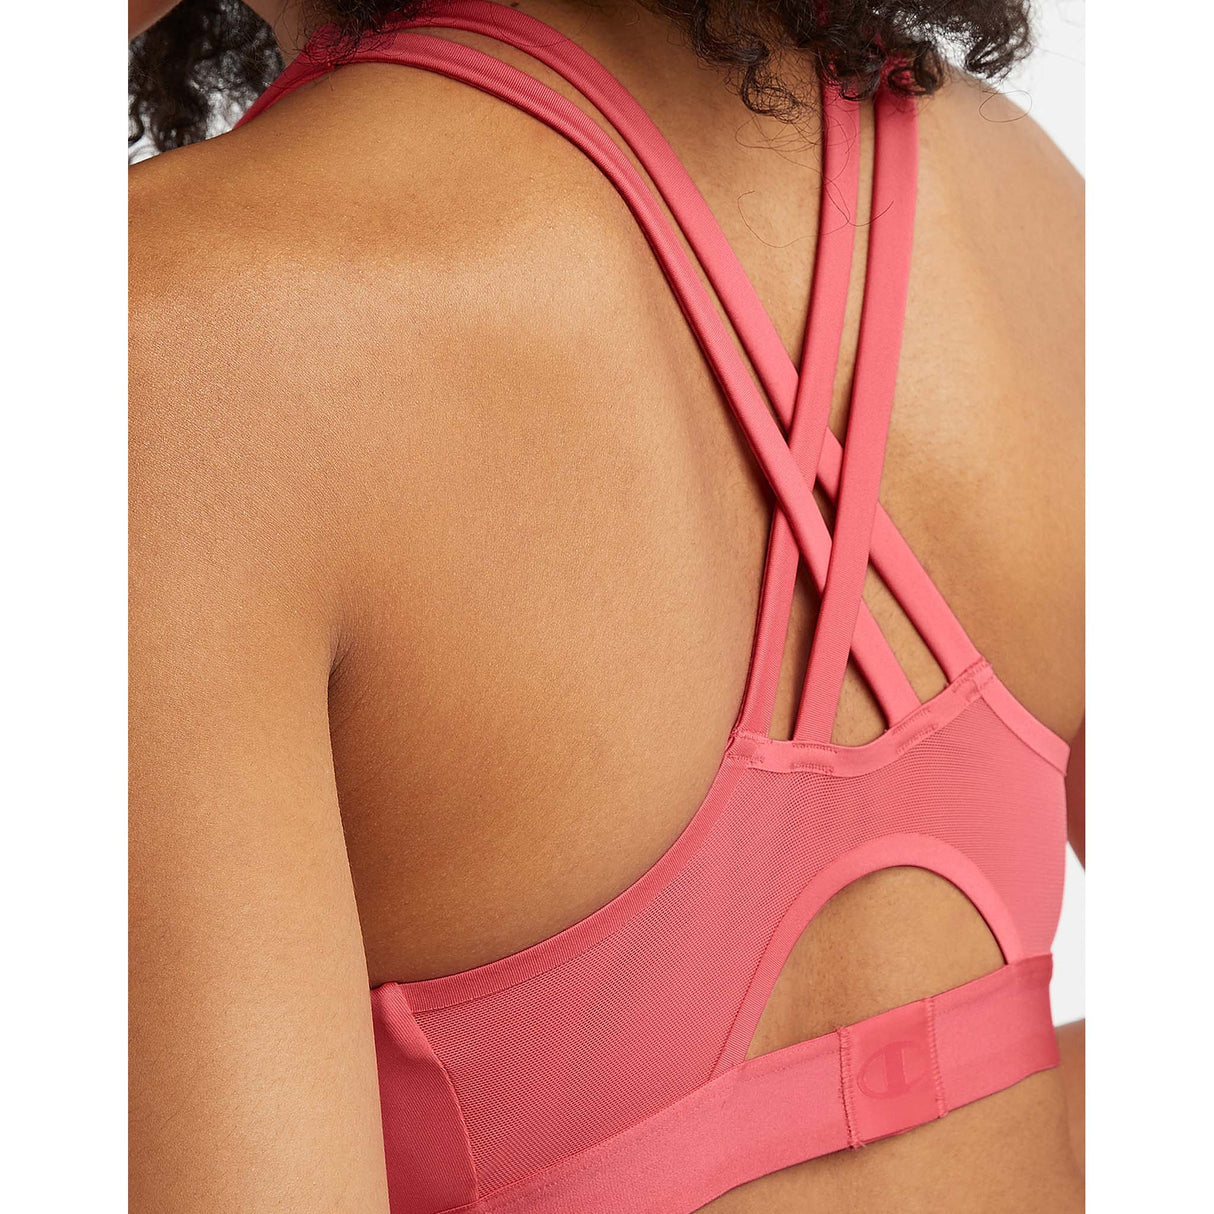 Champion Absolute Eco Strappy soutien-gorge sport pinky peach detail